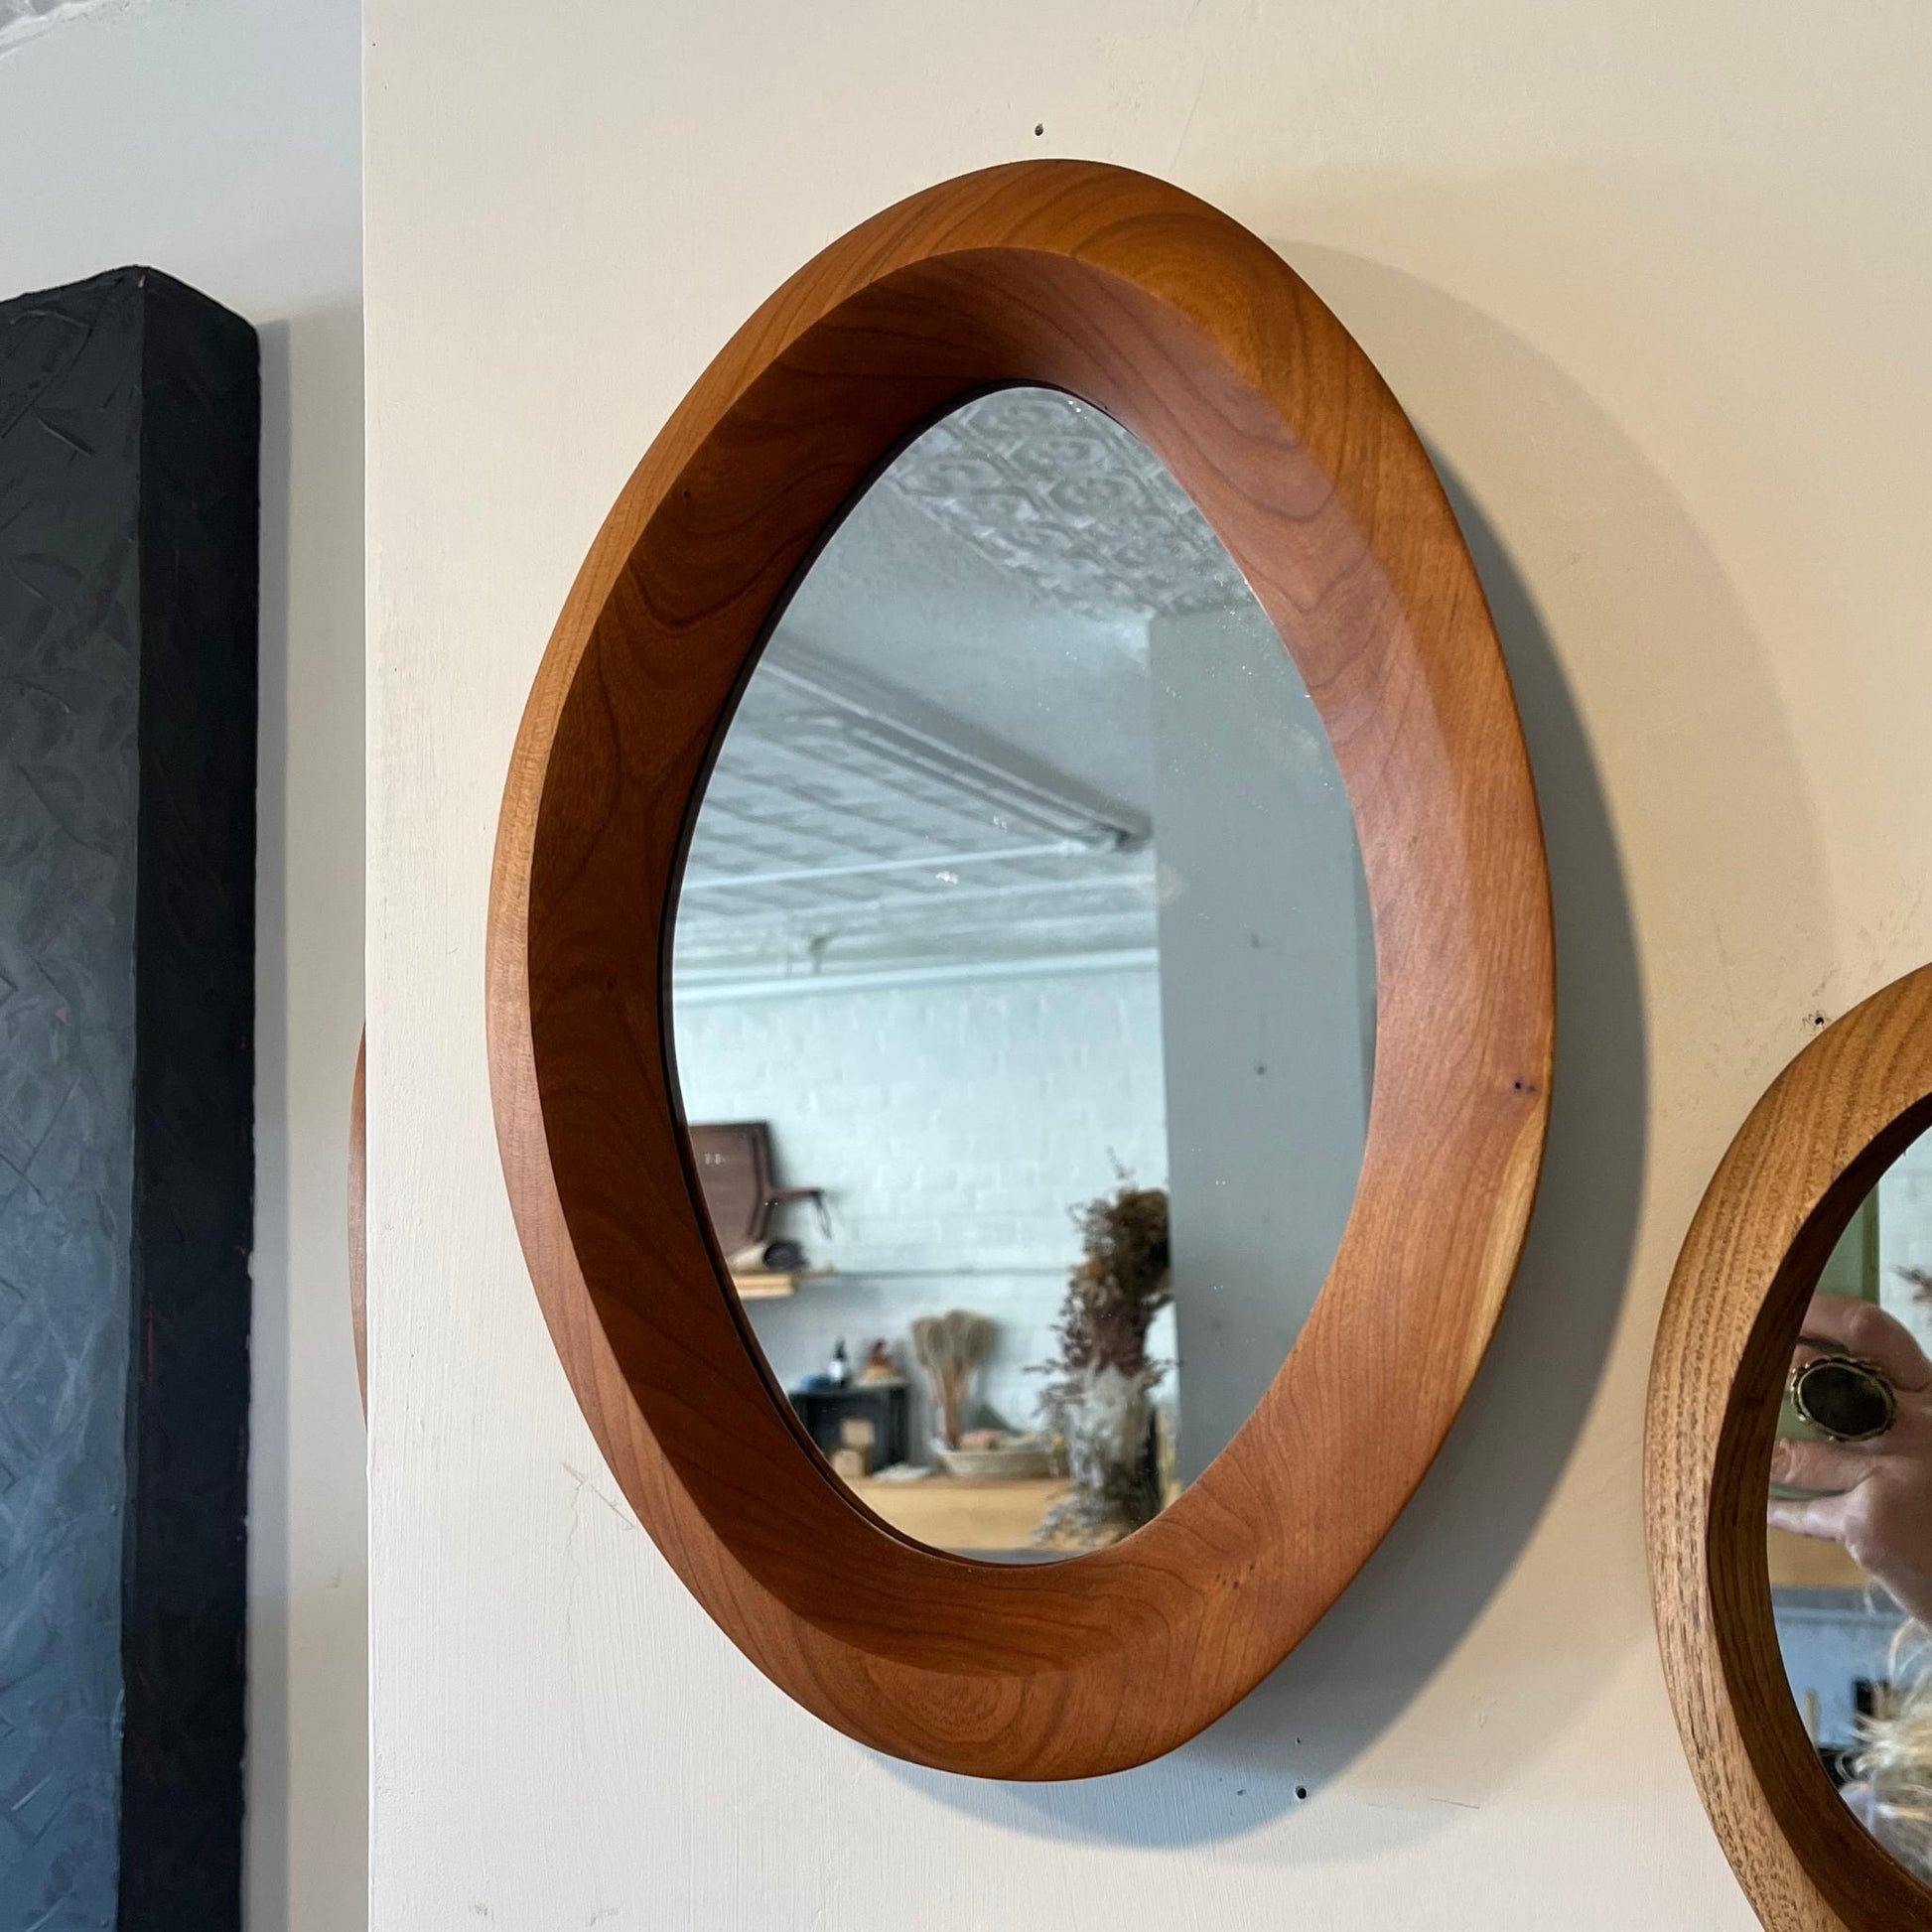 Large size hand-carved cherry wood wall mirror each with one-of-a-kind organic curves and shape